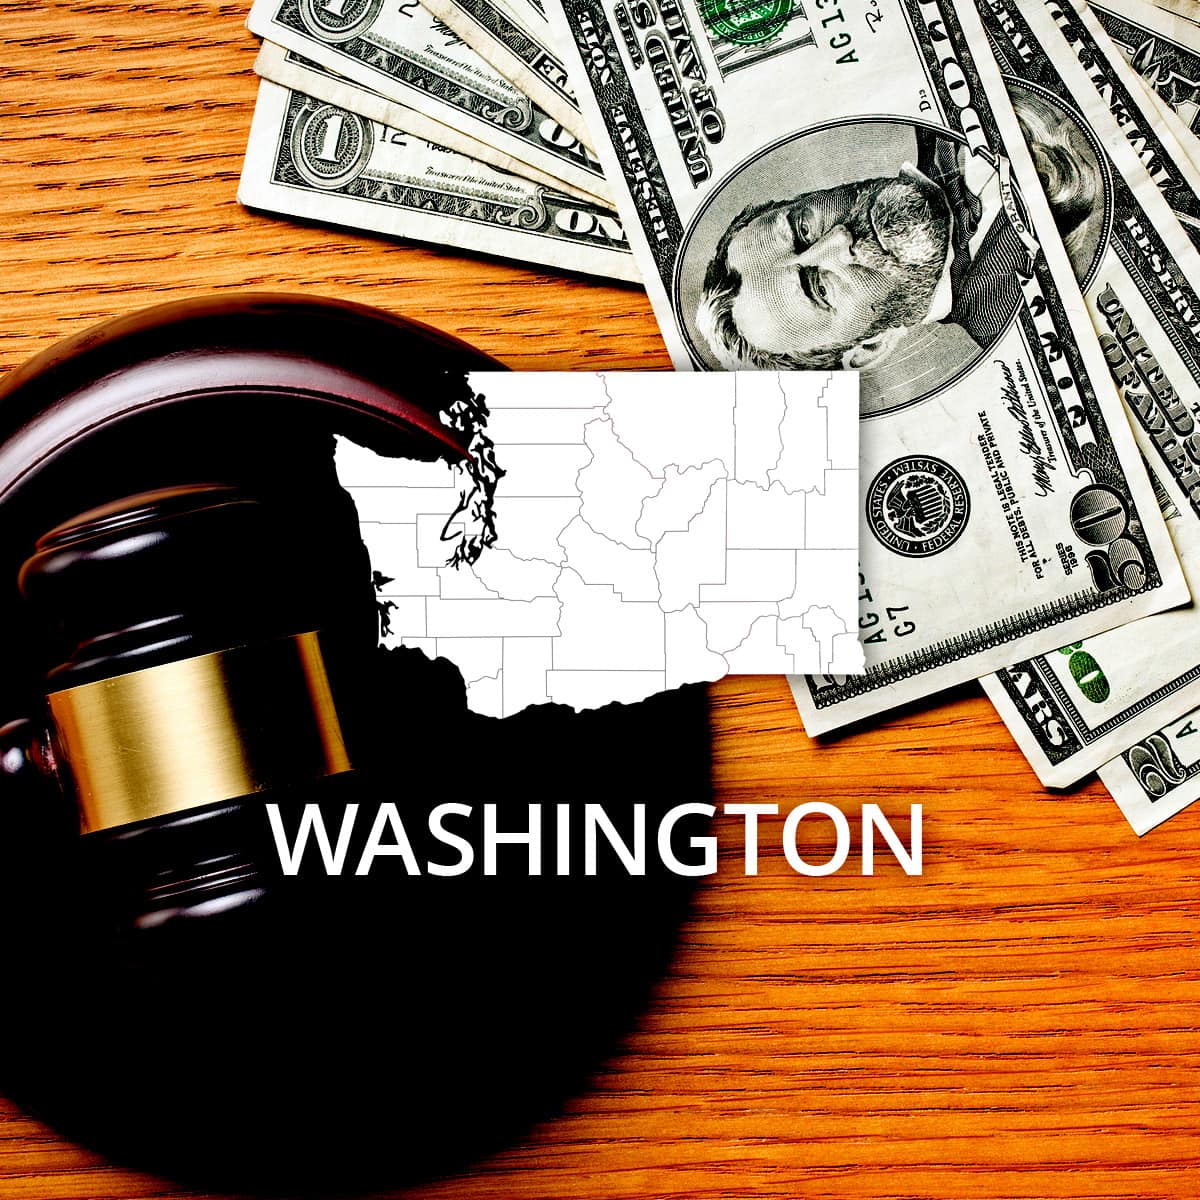 How to File Bankruptcy in Washington